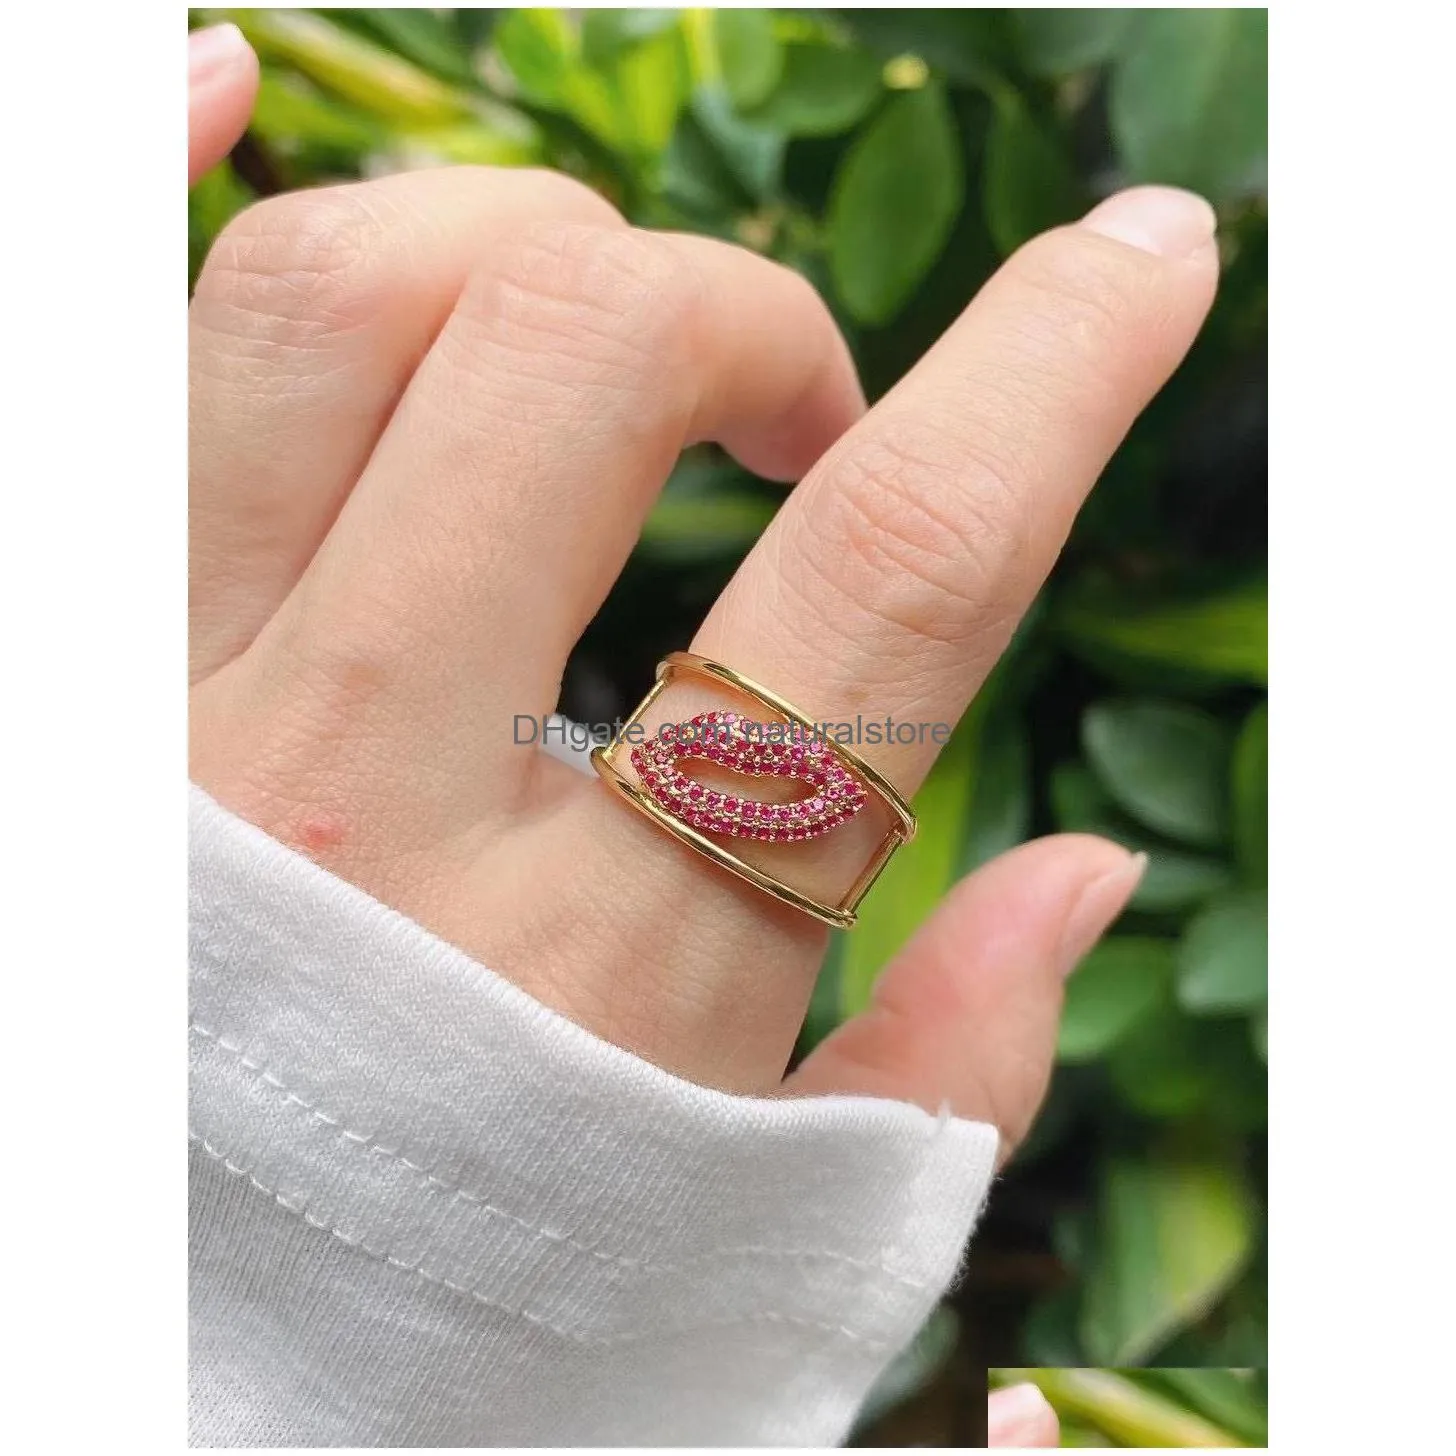 10pcs fashion crystal zircon lip mouth hollow design open adjustable brass ring girl party gift